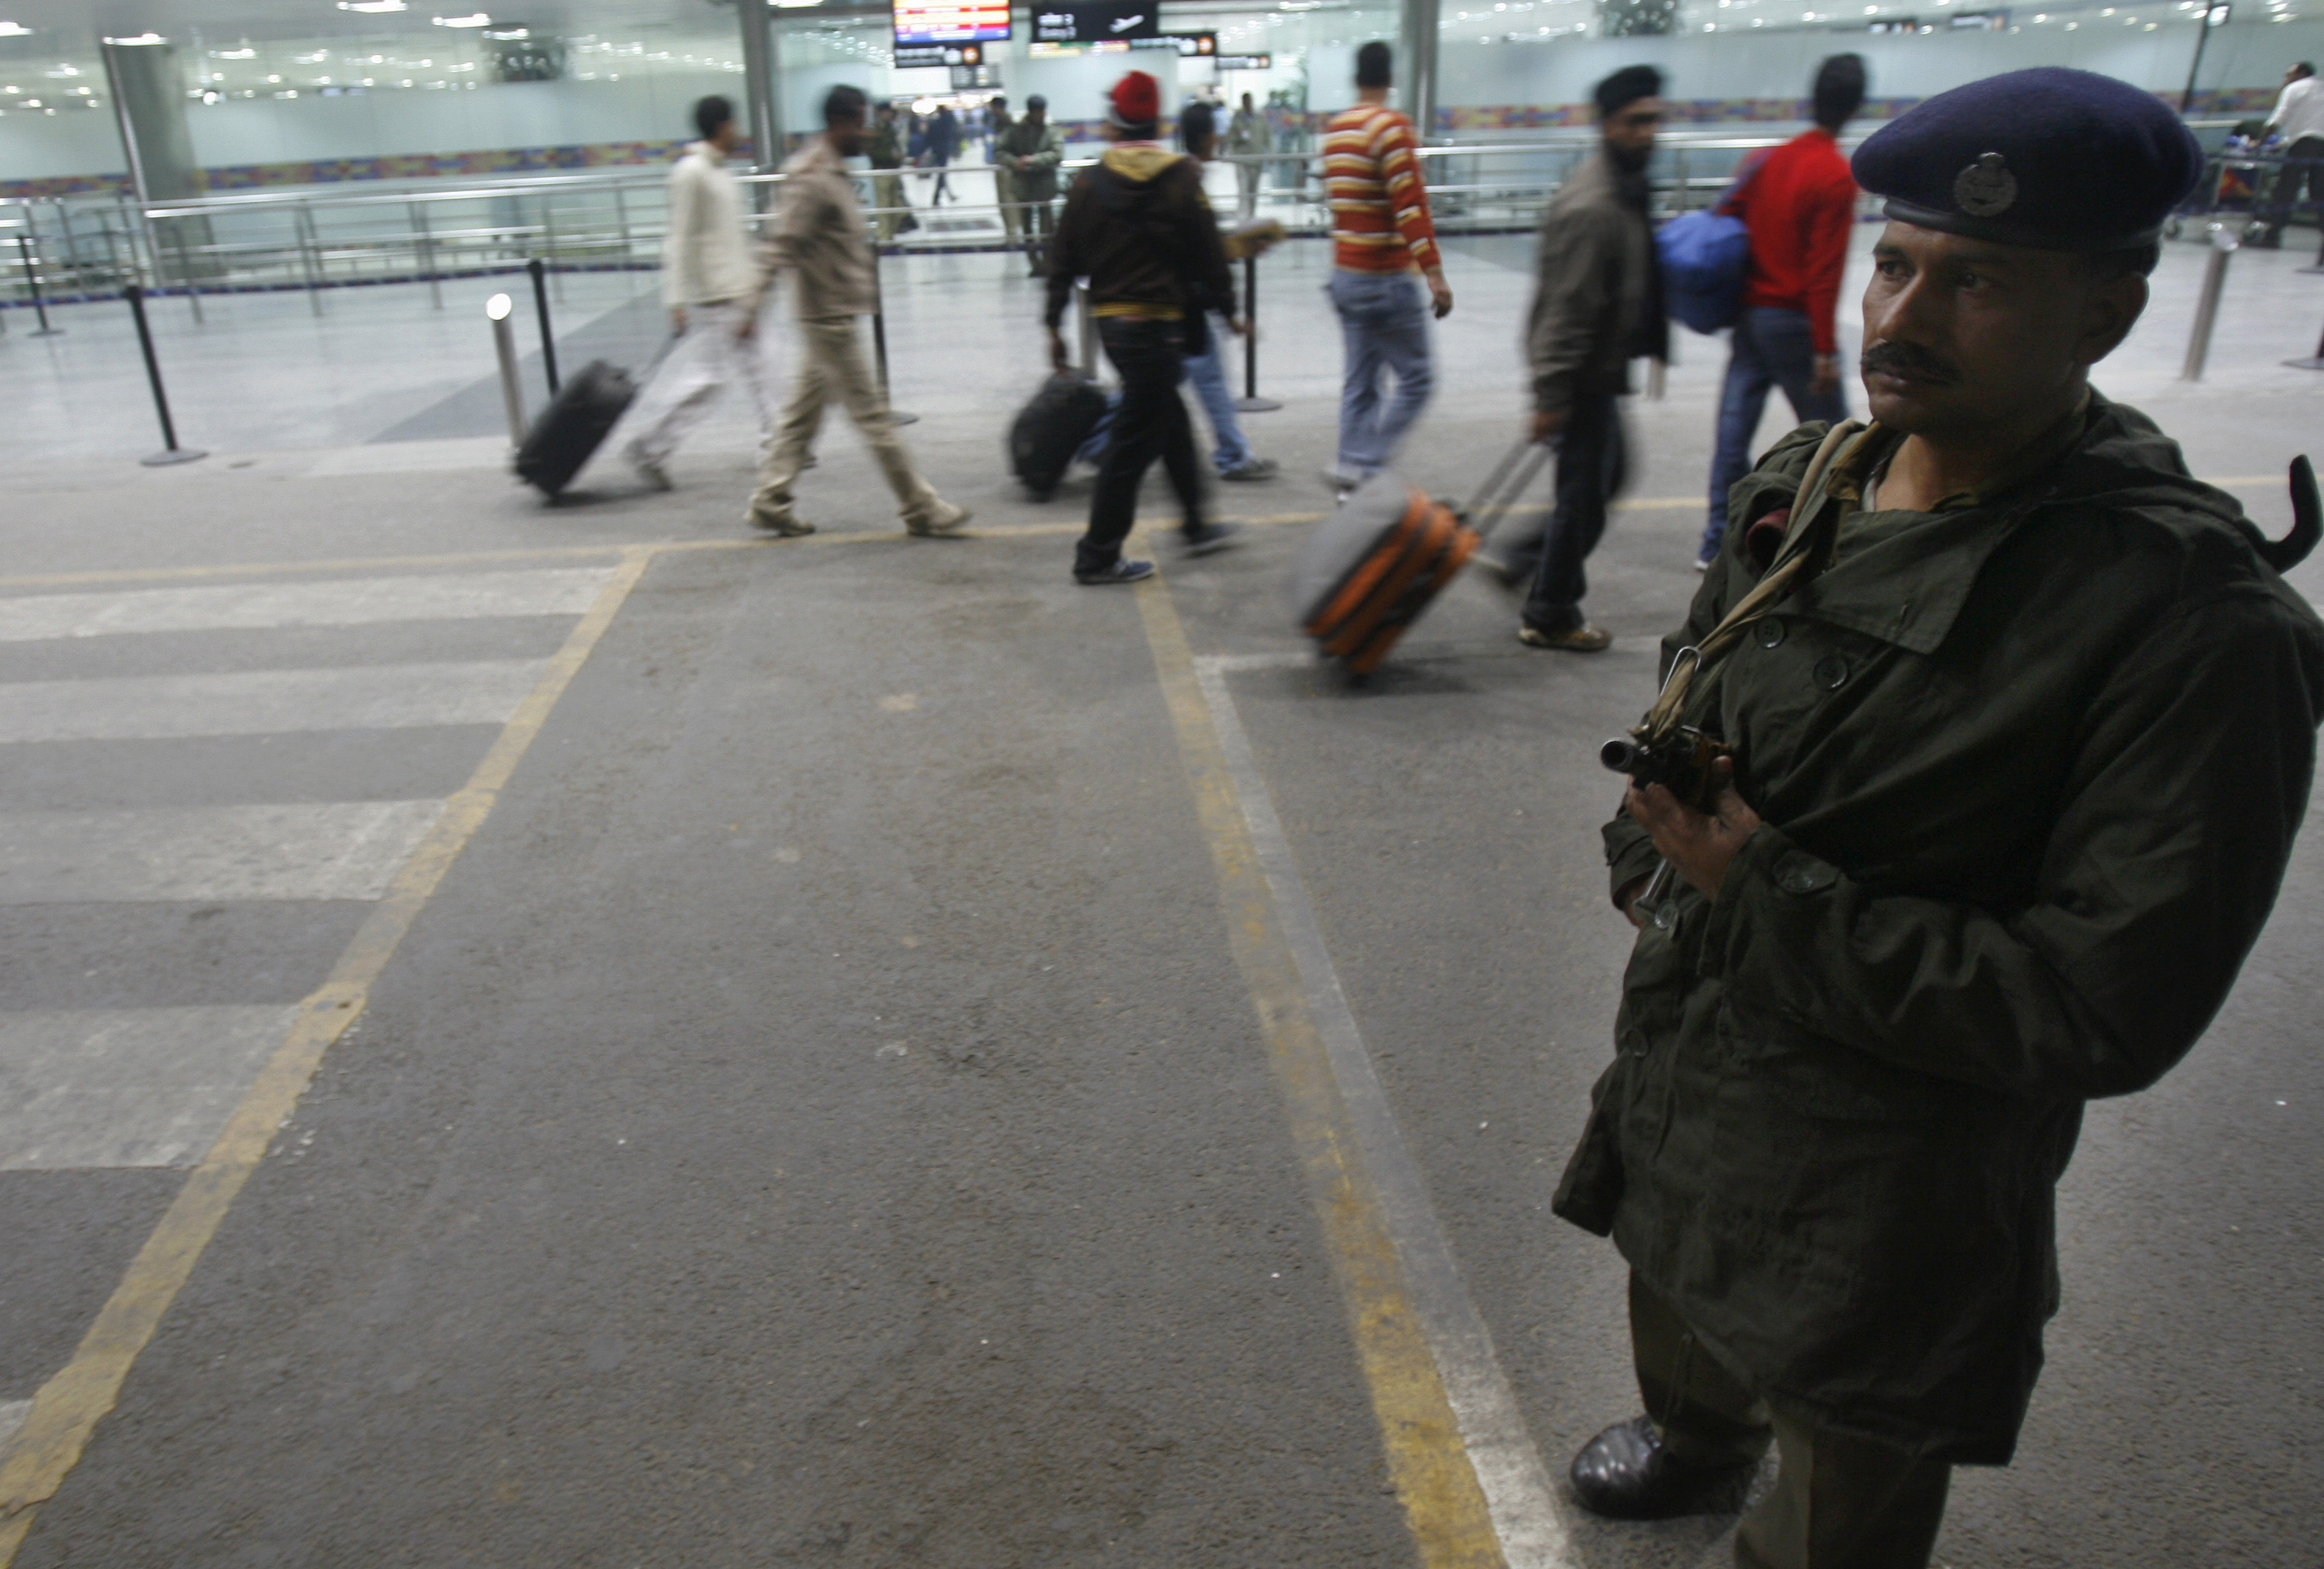 A paramilitary soldier stands guard as passengers arrive at the international airport in New Delhi